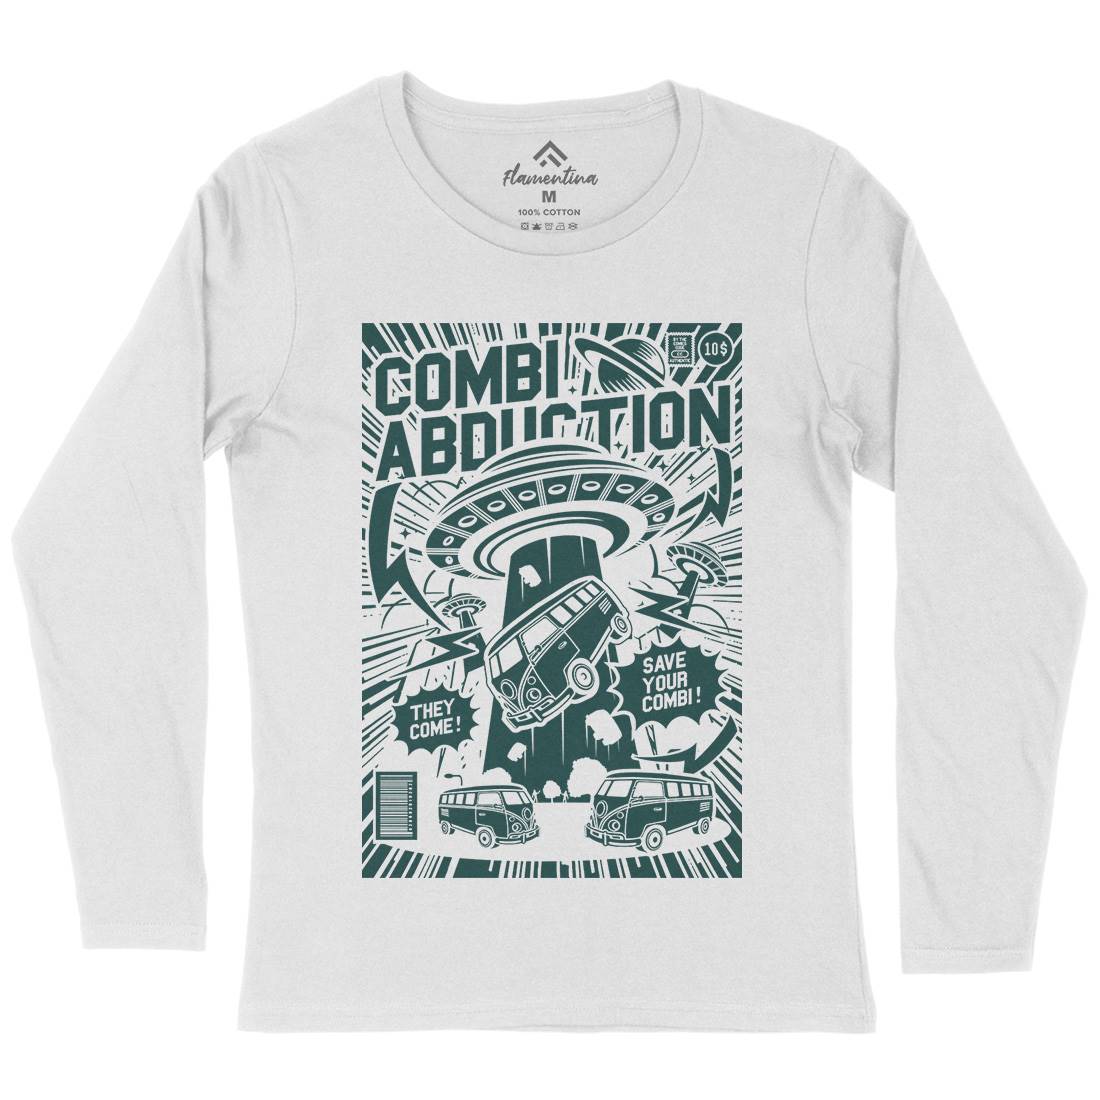 Combi Abduction Womens Long Sleeve T-Shirt Space A220